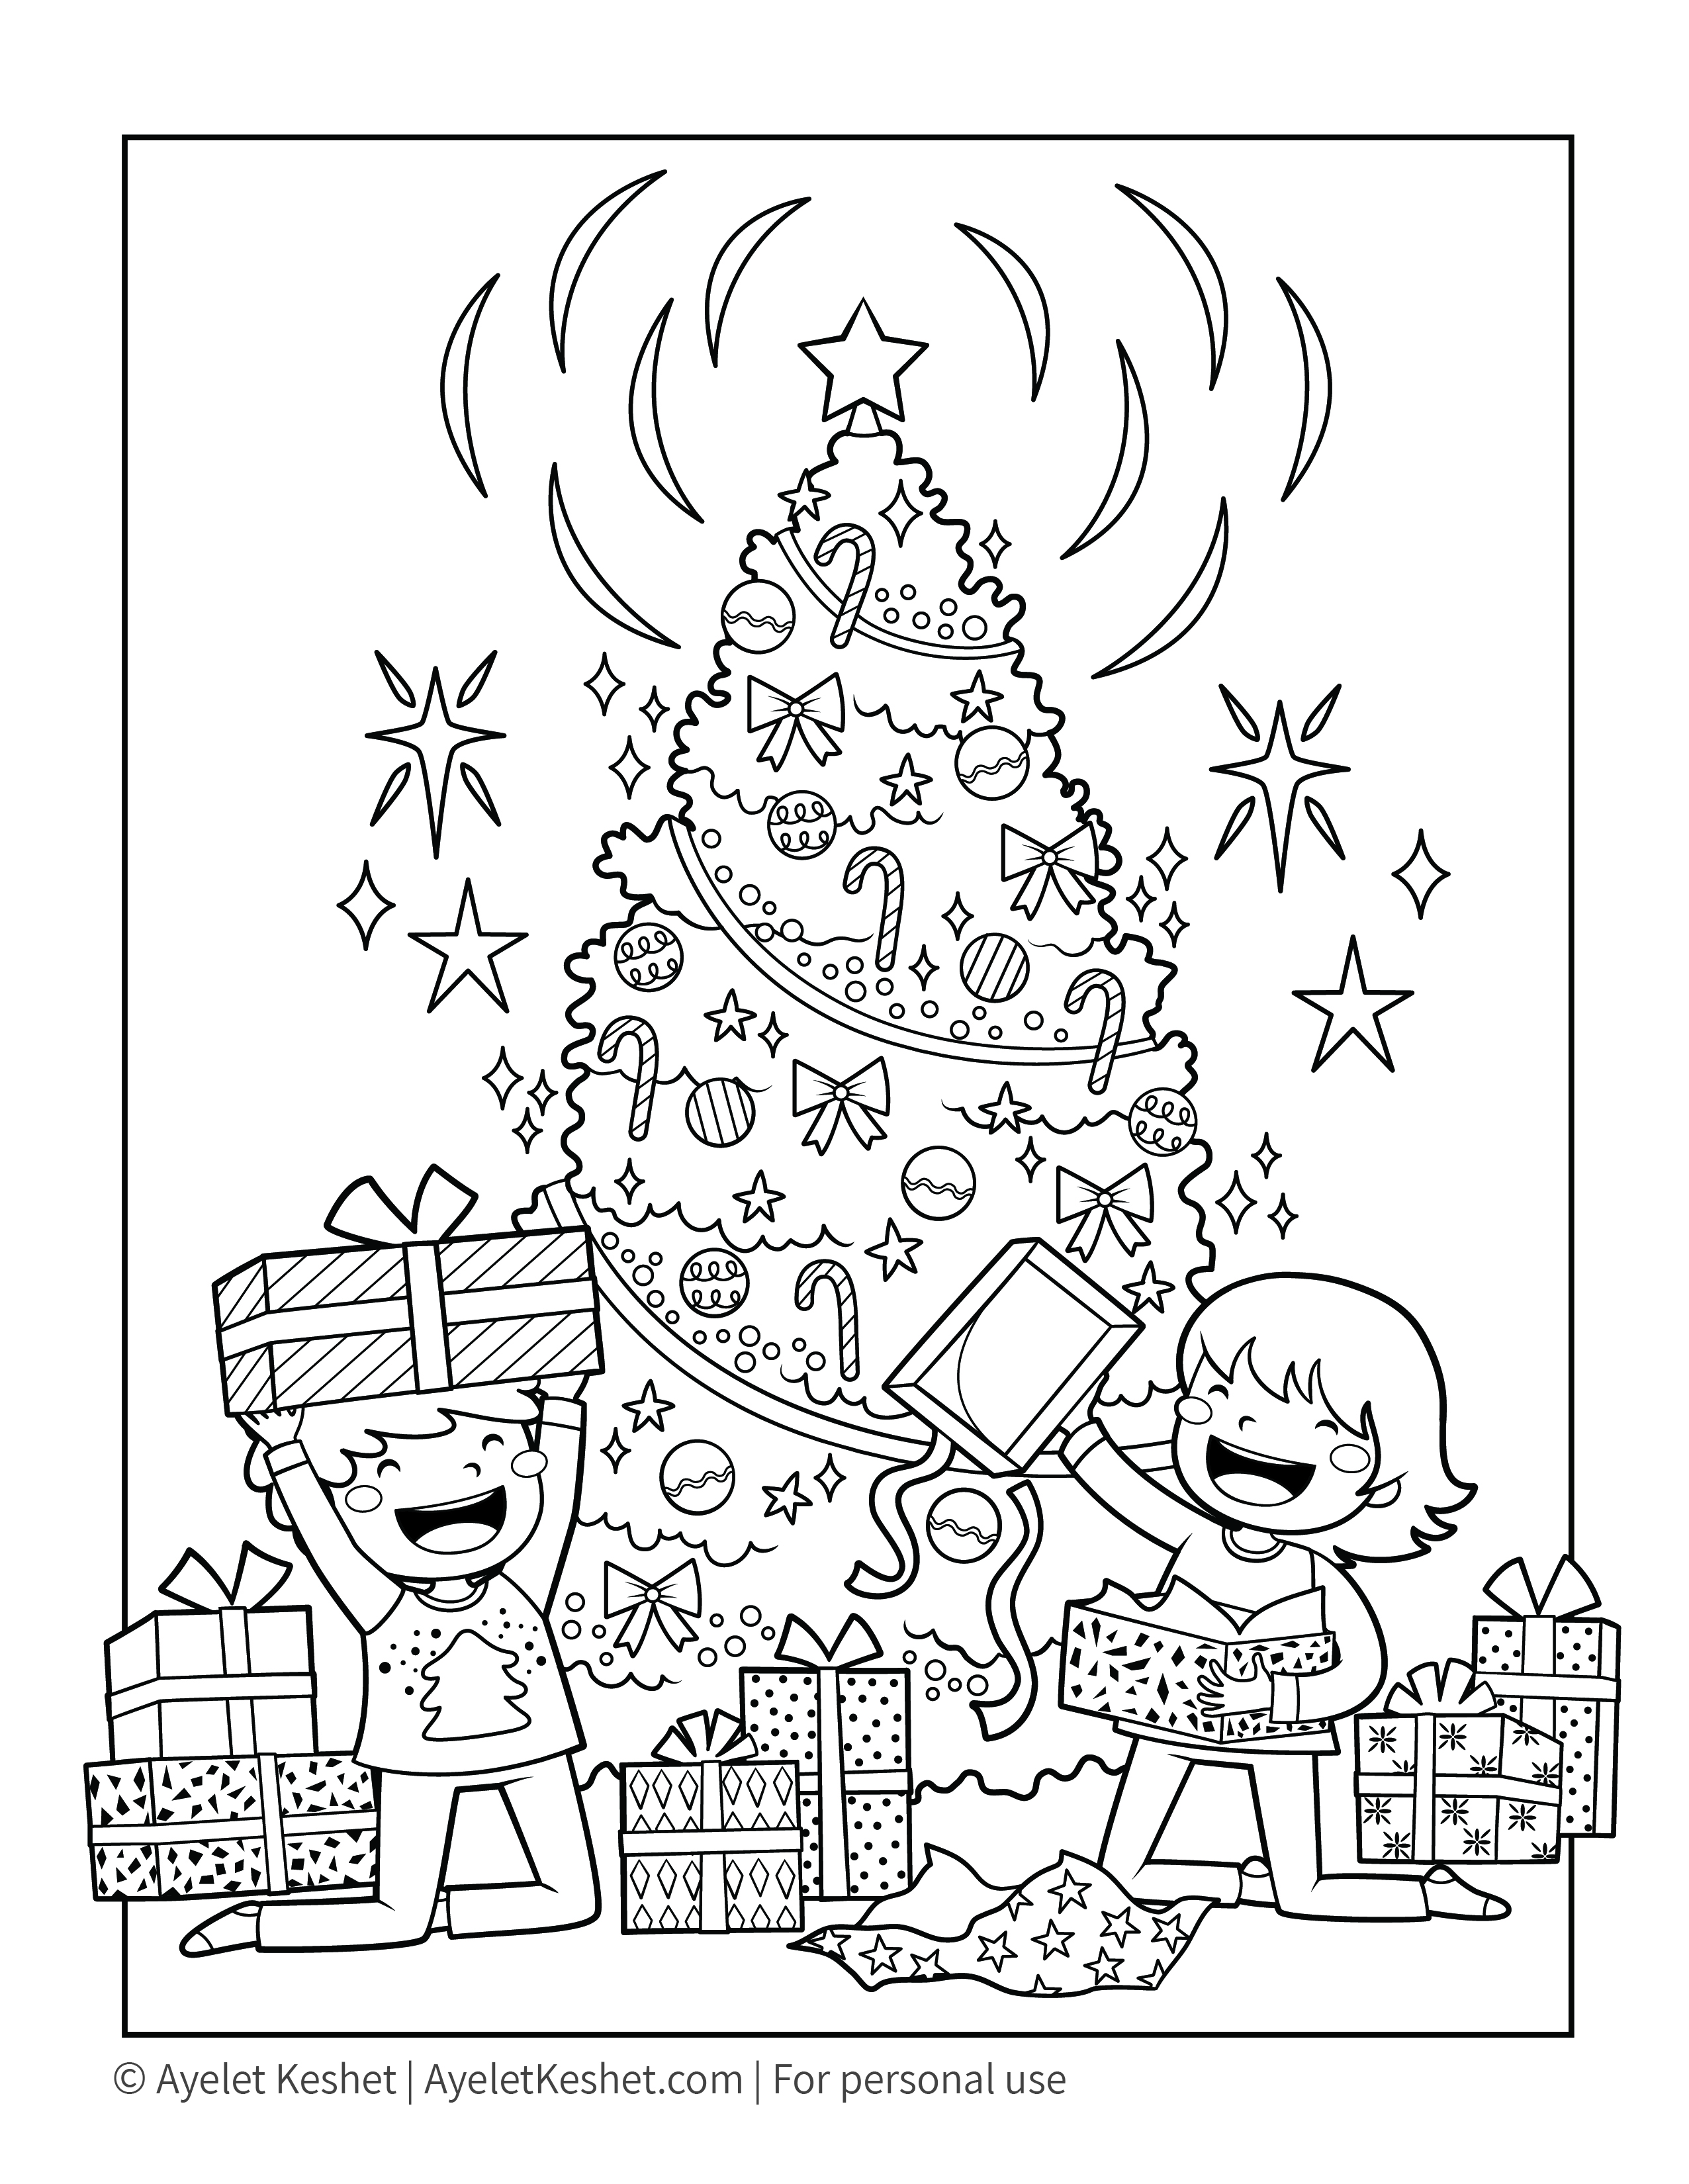 Free Printable Christmas Coloring Pages for kids   Ayelet ...